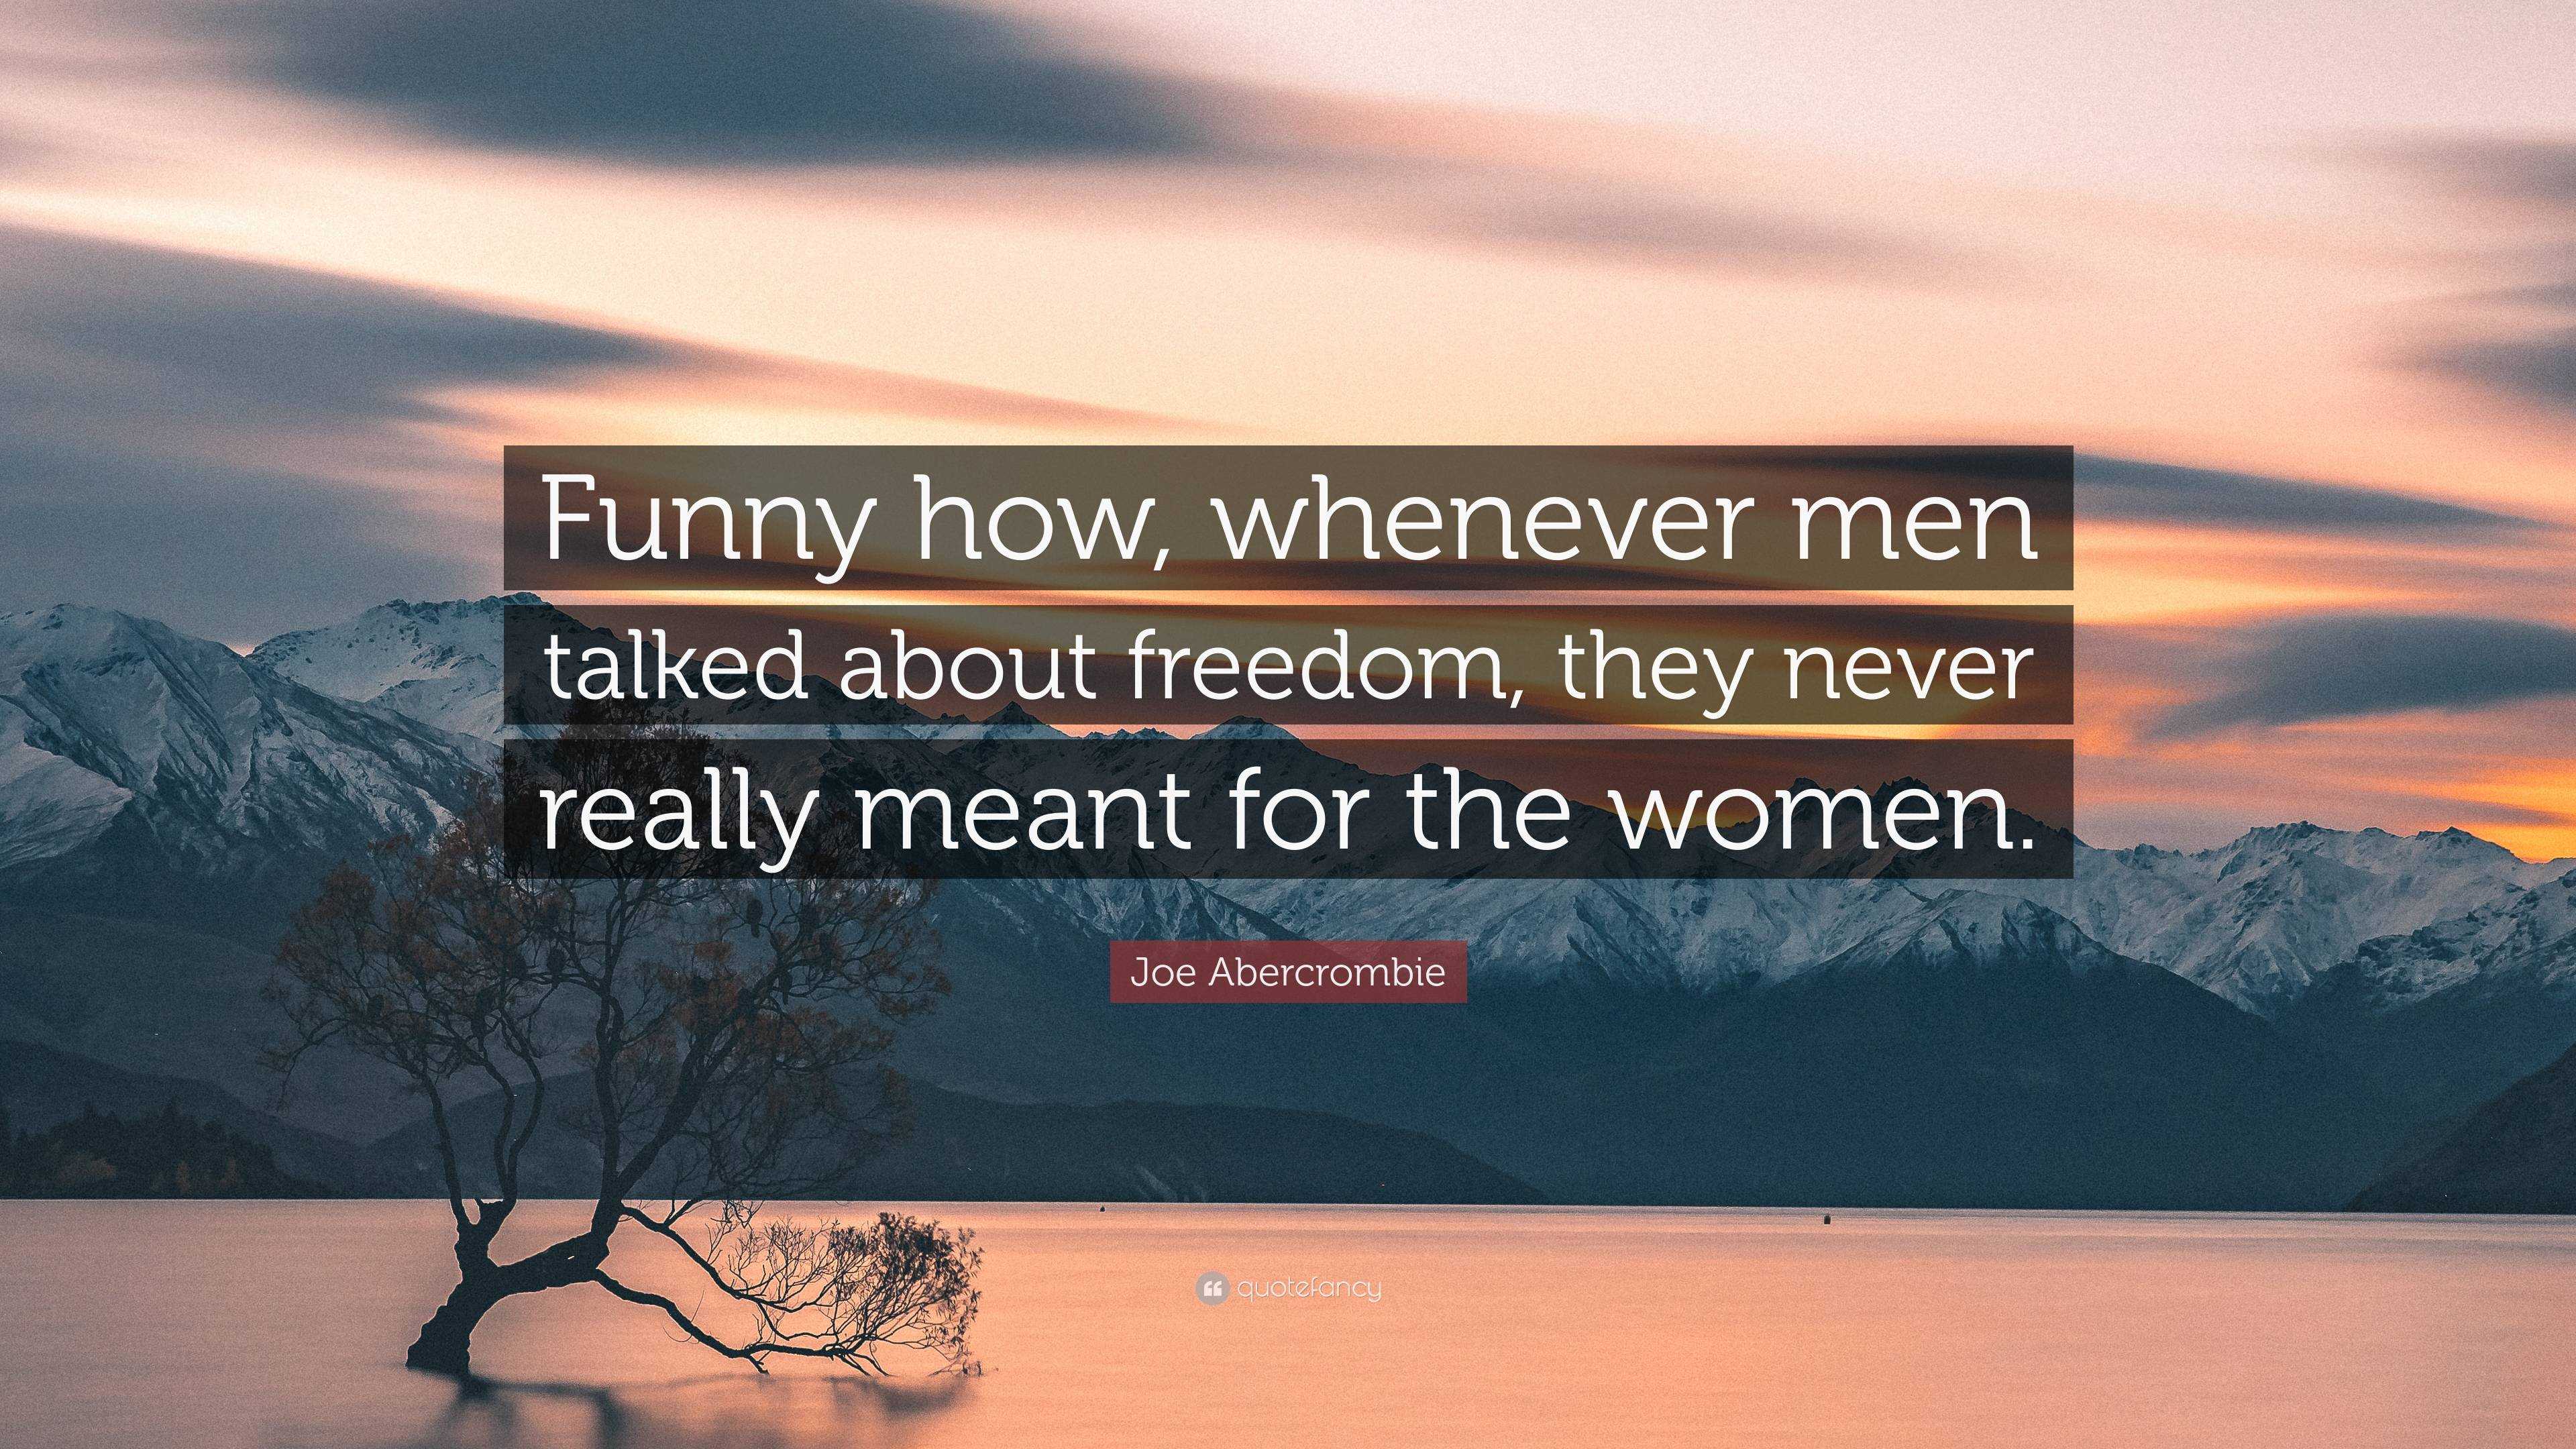 Joe Abercrombie Quote: “Funny how, whenever men talked about freedom, they  never really meant for the